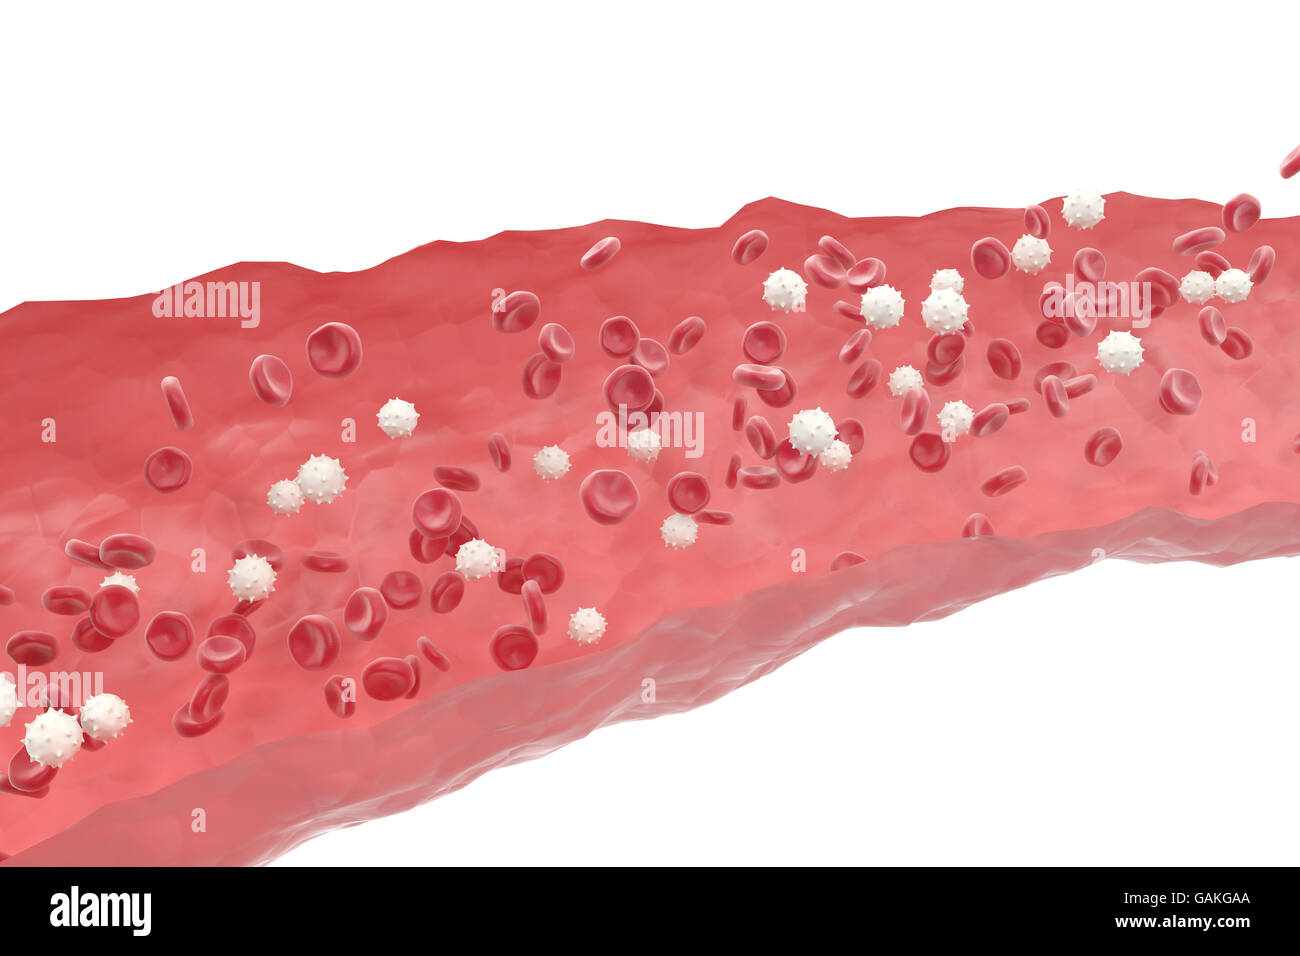 Red and white blood cells in cut flowing through veins, scientific  medical 3d illustration Stock Photo